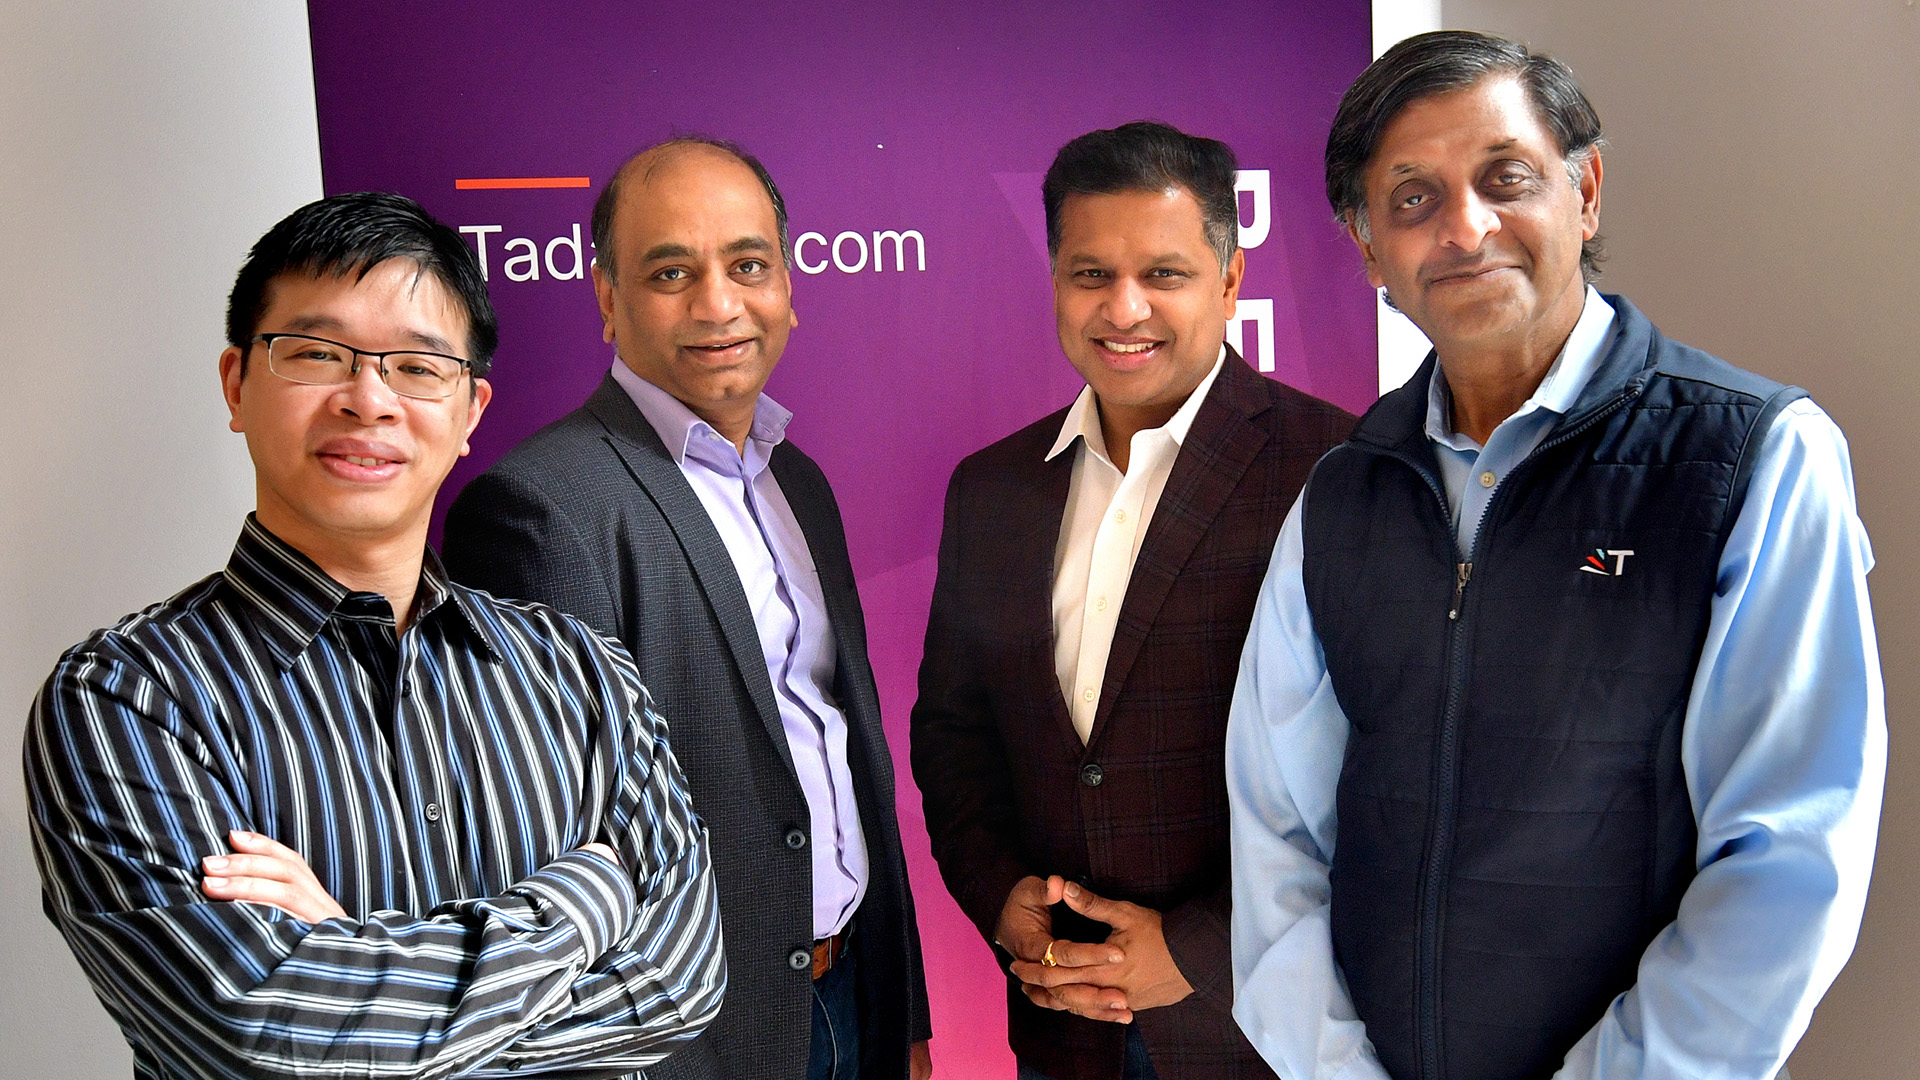 TADA's senior staff, from left to right: Denny Tu, senior vice president of integrated product and customer success; Kiran Khadke, Phd, senior VP of CPG and manufacturing solutions; Ravi Uddavolu, senior VP of industrial and automotive, and Seshadri Guha, CEO